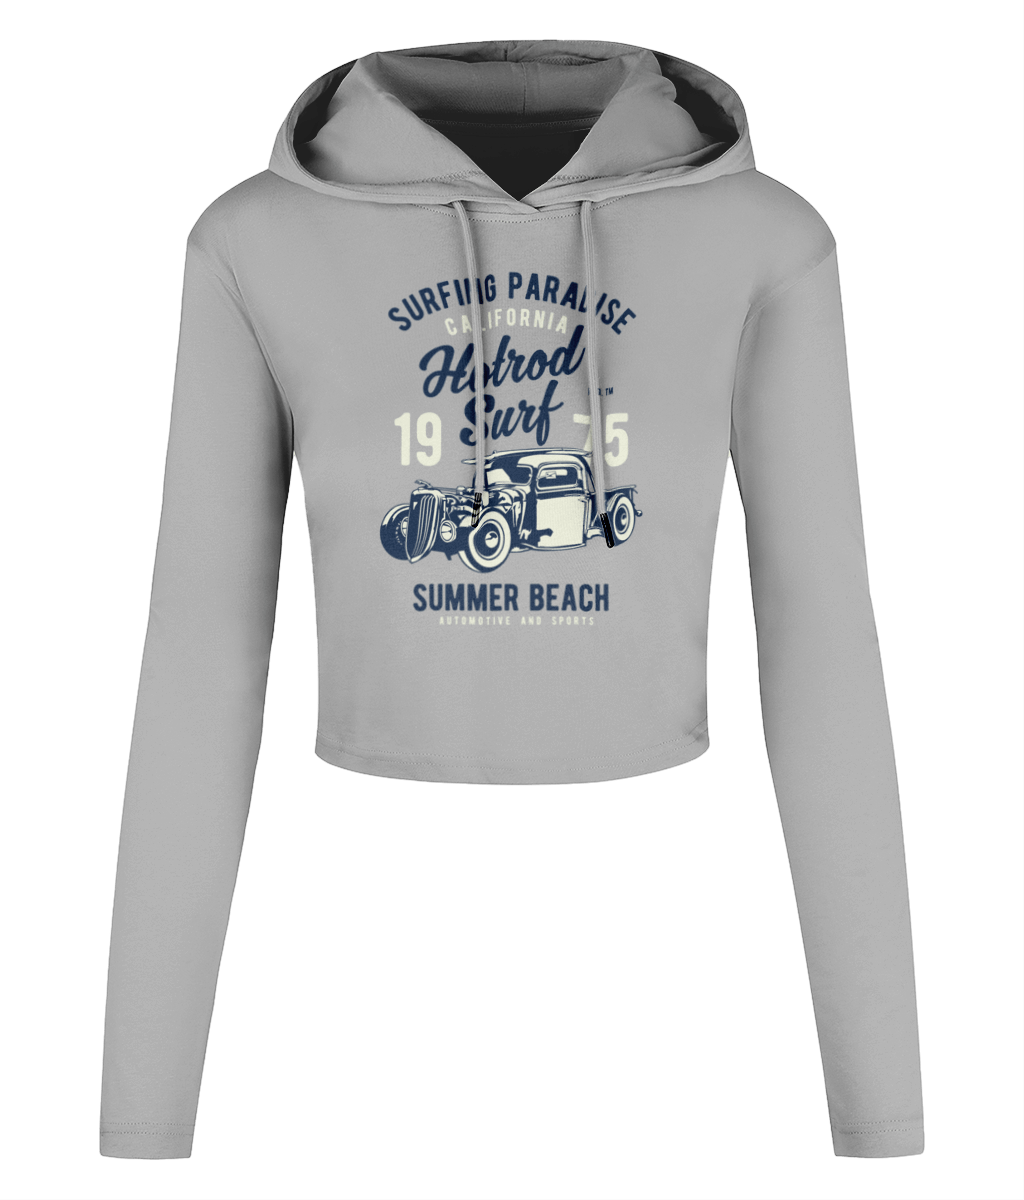 Hotrod Surf – Women’s Cropped Hooded T-shirt